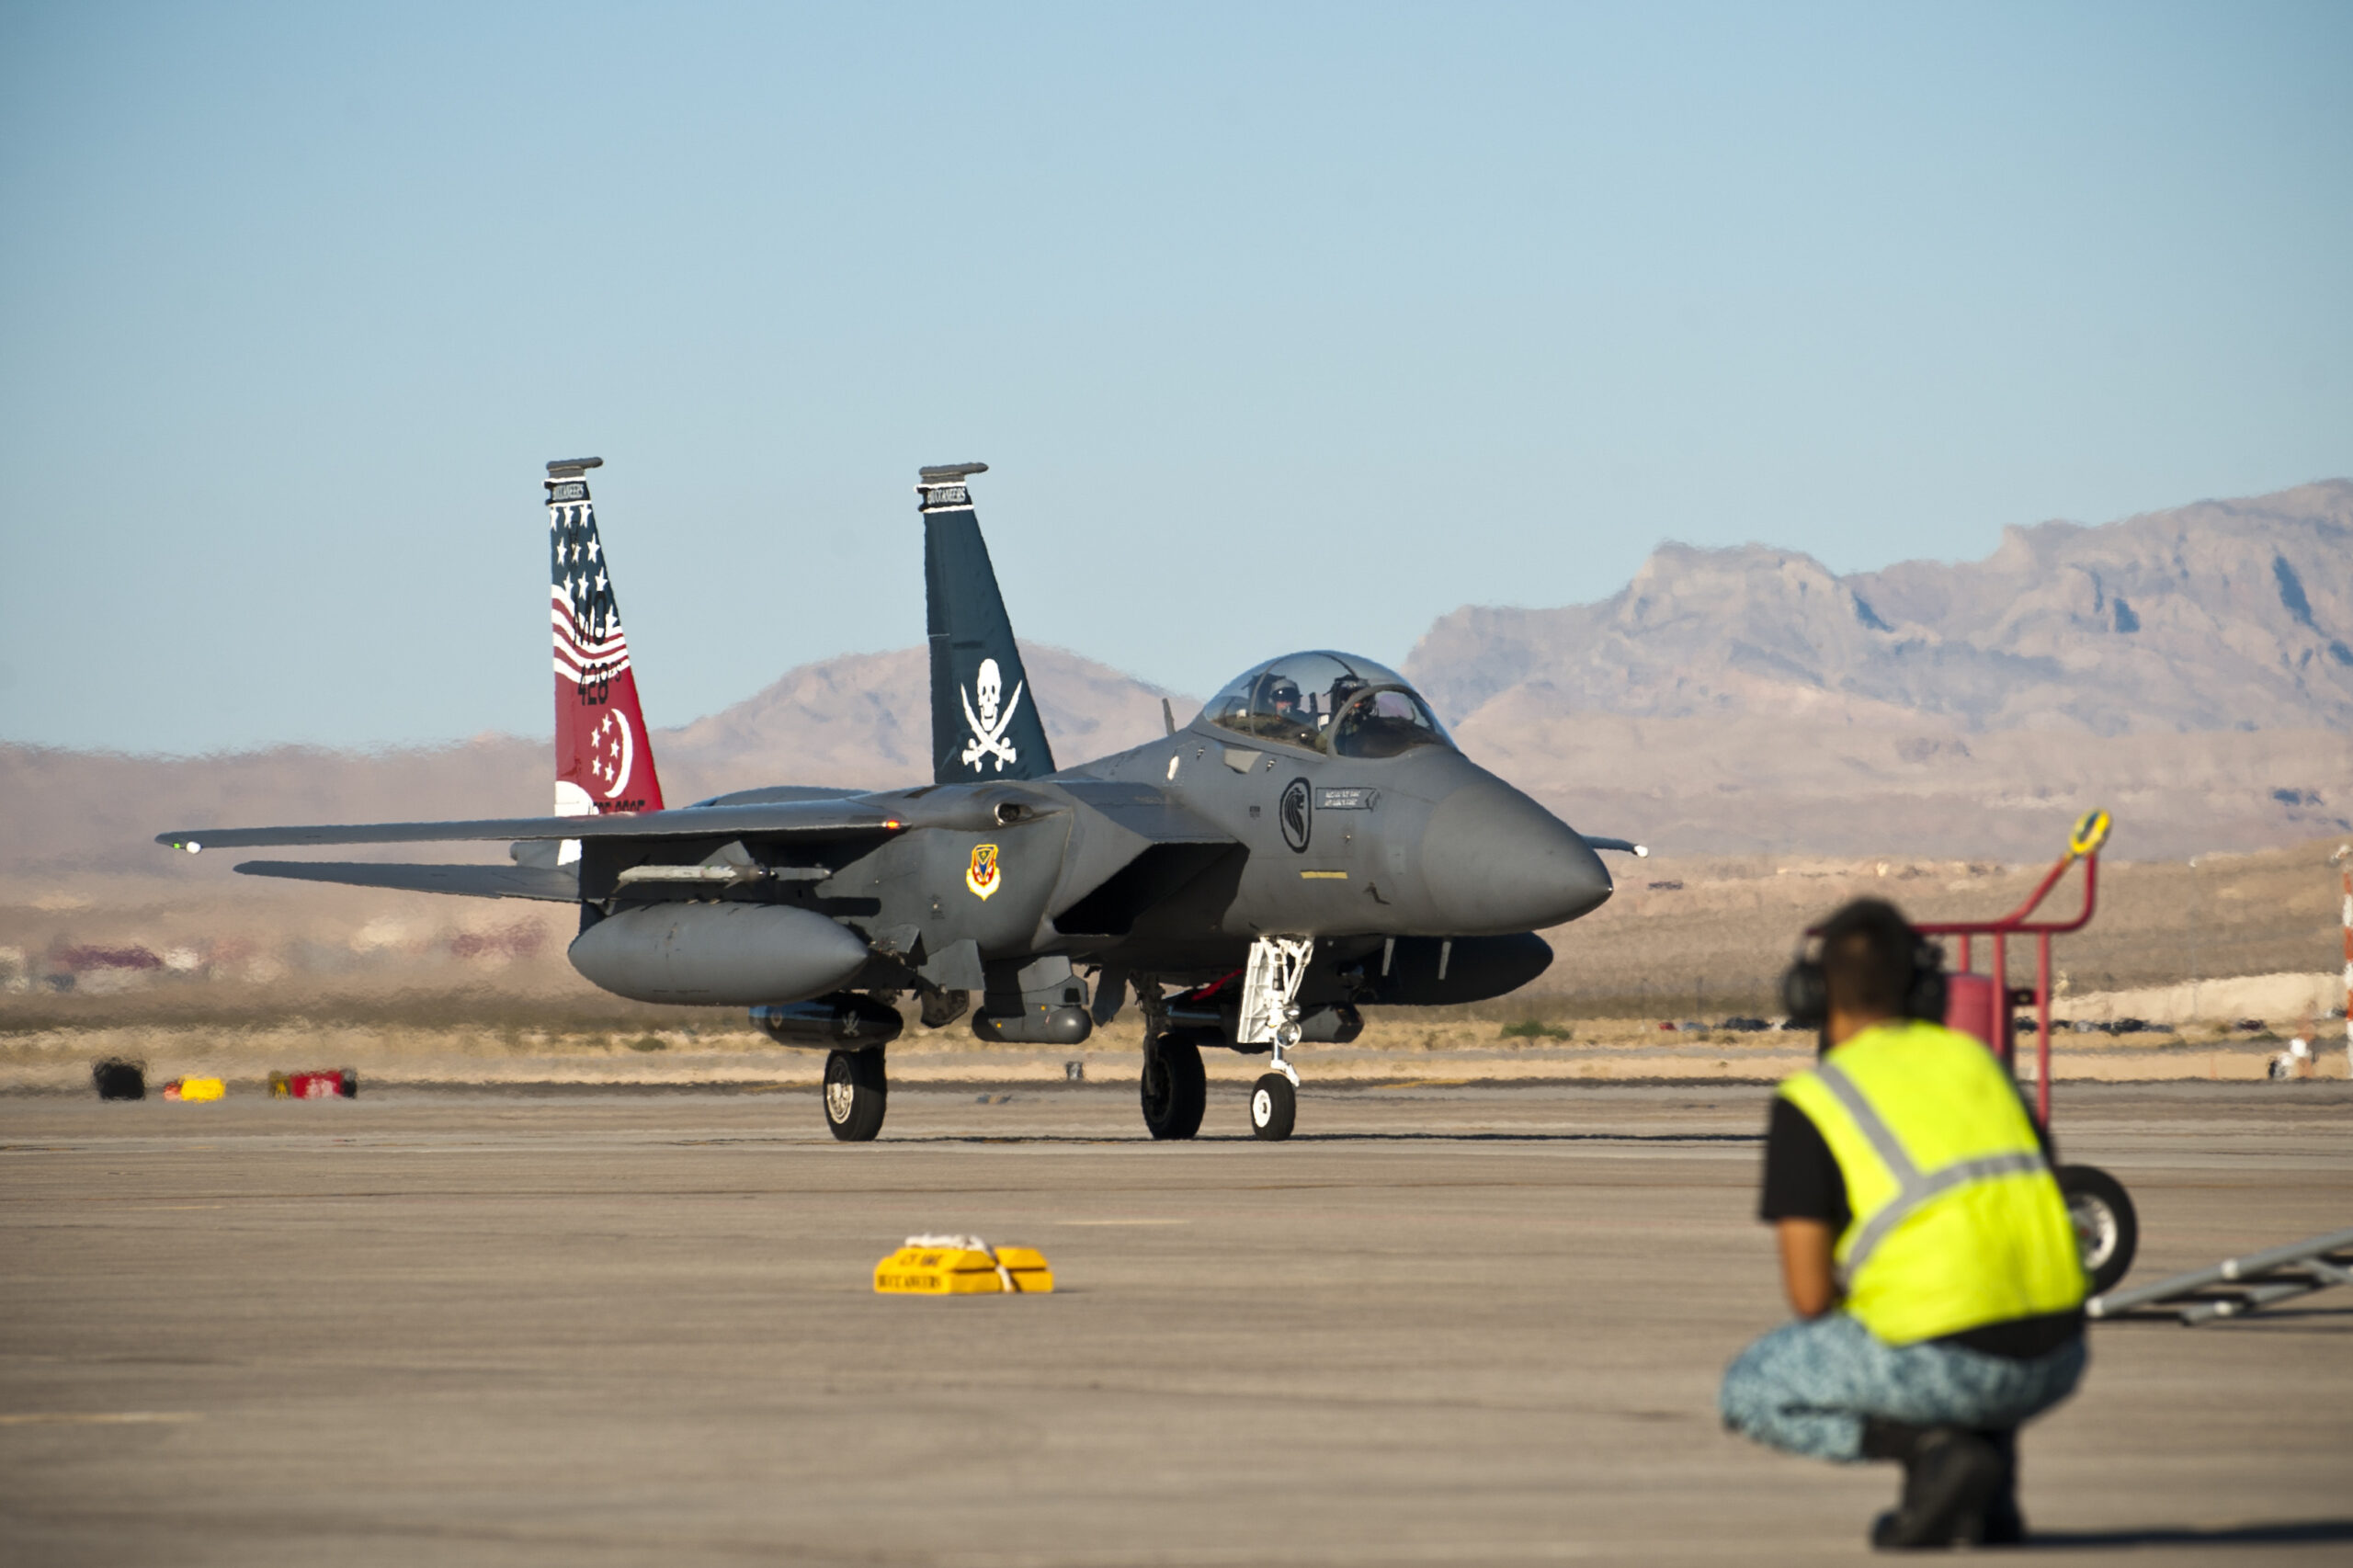 A Republic of Singapore Air Force crew chief waits for the arrival of an F-15SG before the start of Exercise Red Flag 14-3, July 11, 2014, at Nellis Air Force Base, Nevada. <em>U.S. Air Force photo by Airman 1st Class Thomas Spangler</em>